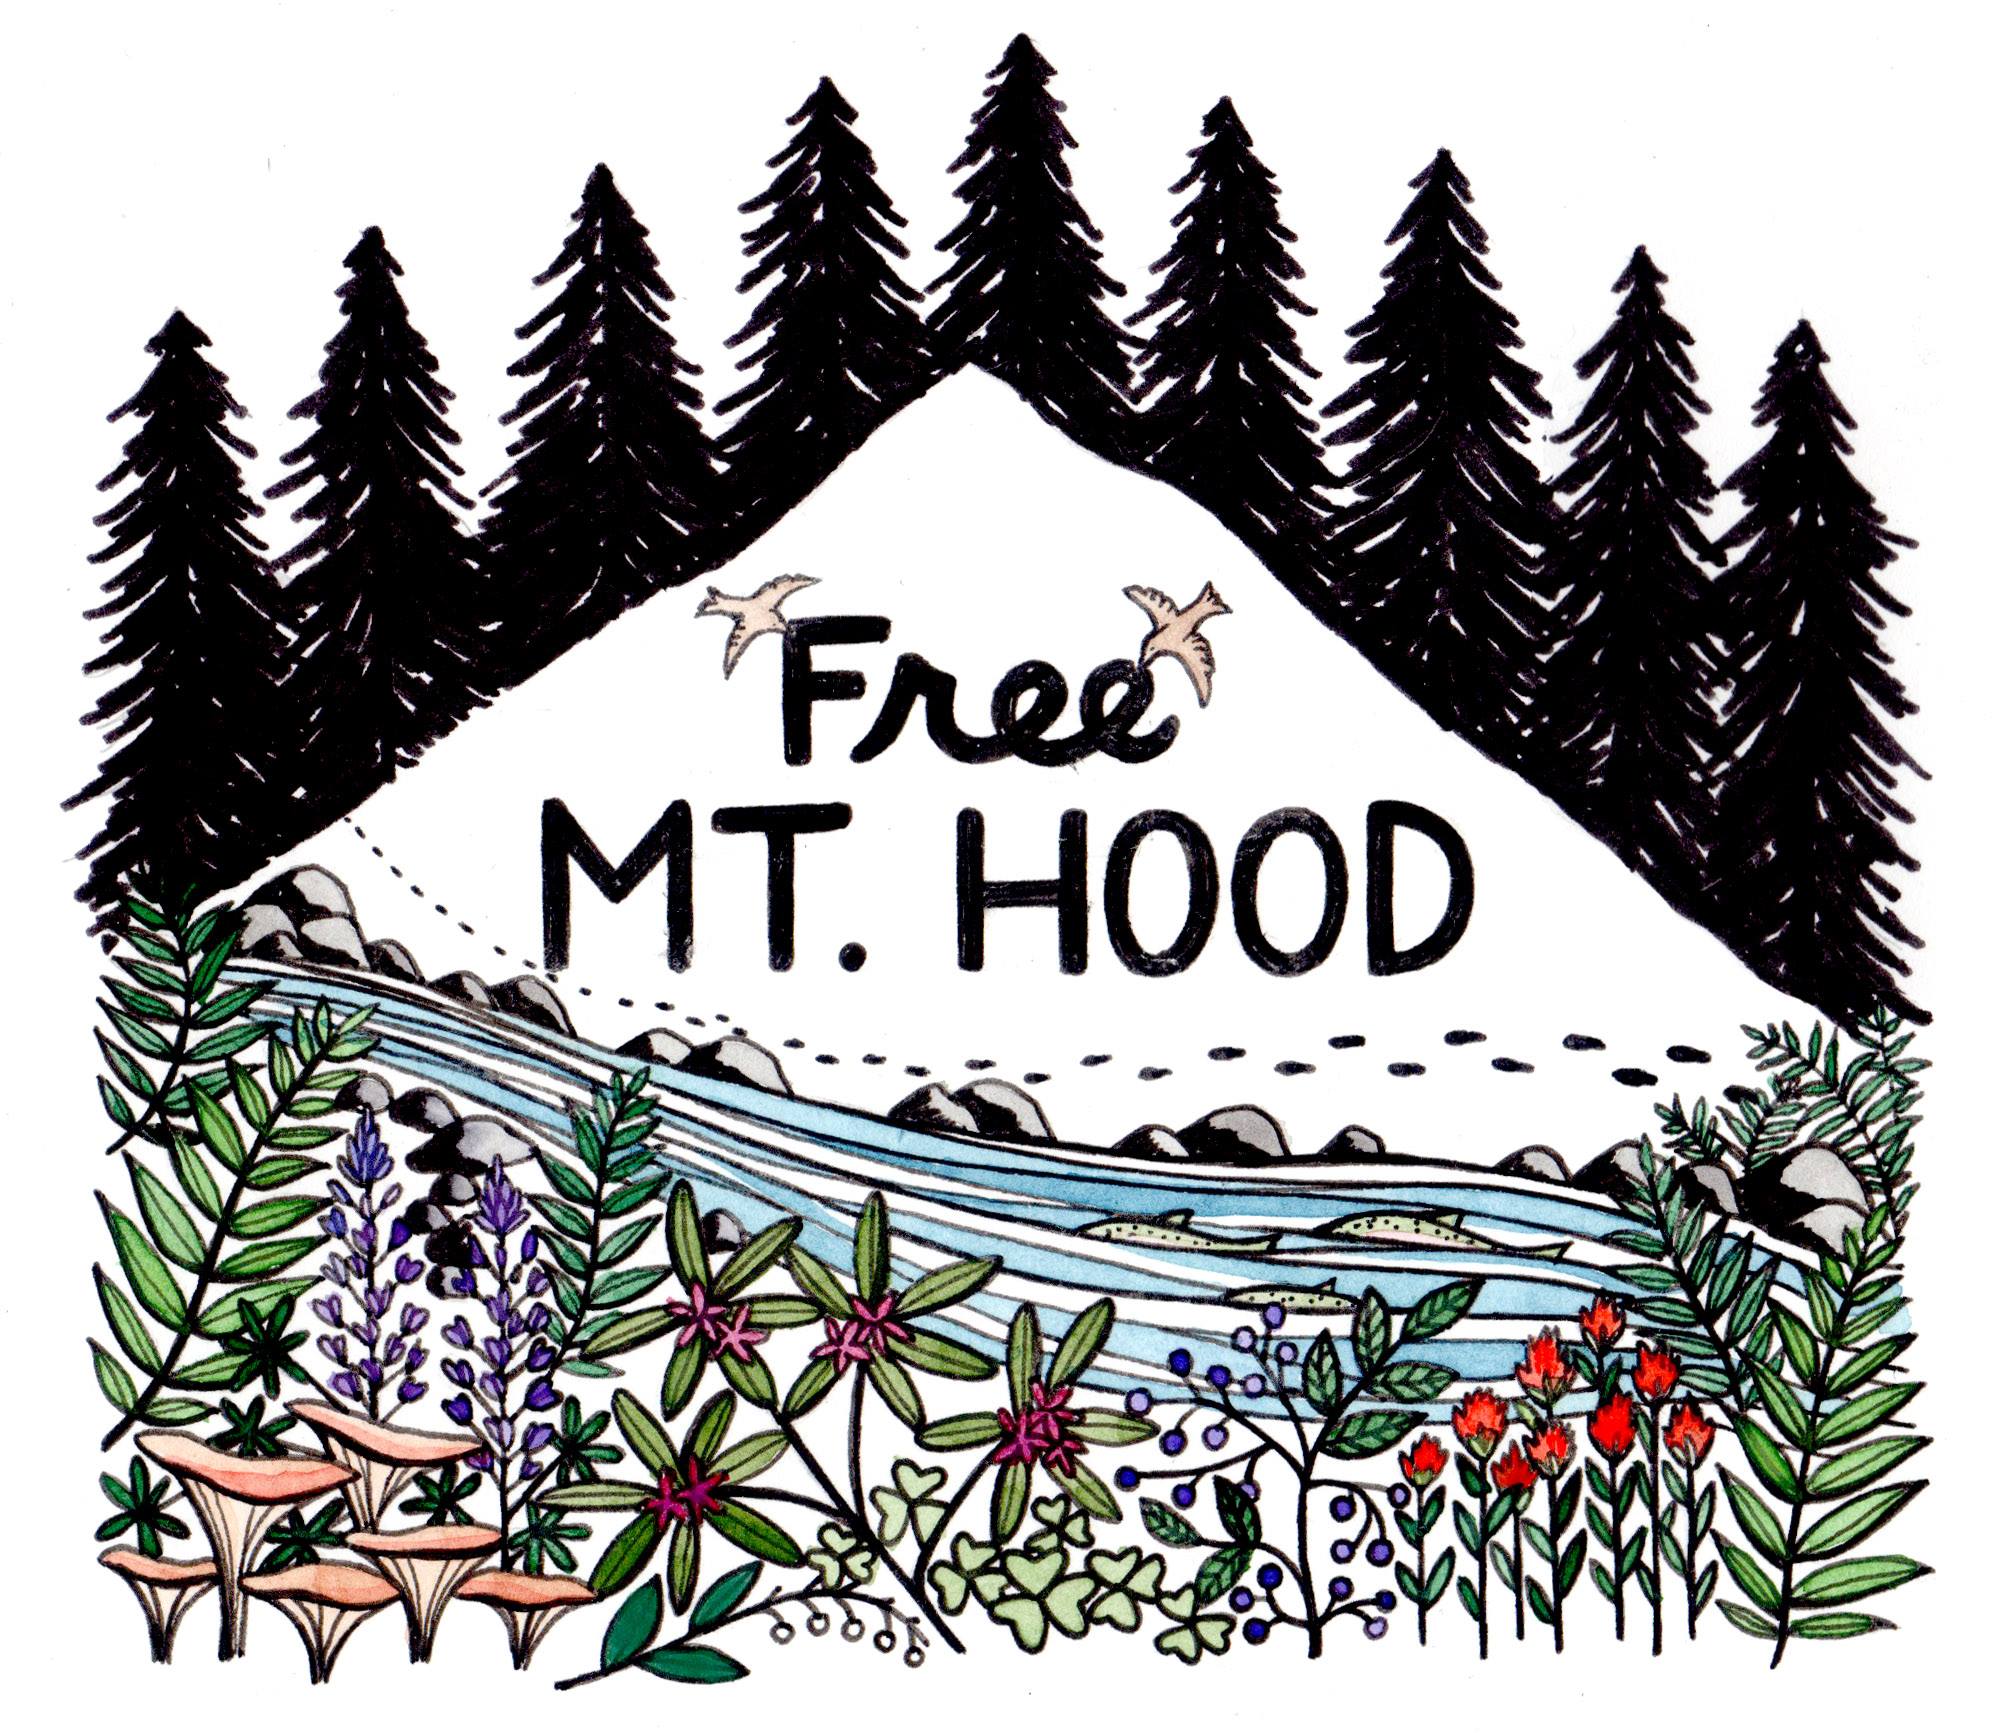 color illustration of Mt. Hood's silhoette against a pine ridge. in the foreground flows a river surrounded by native flora, lupine, fern, etc. Across the mountain birds hold text that reads: Free MT. HOOD